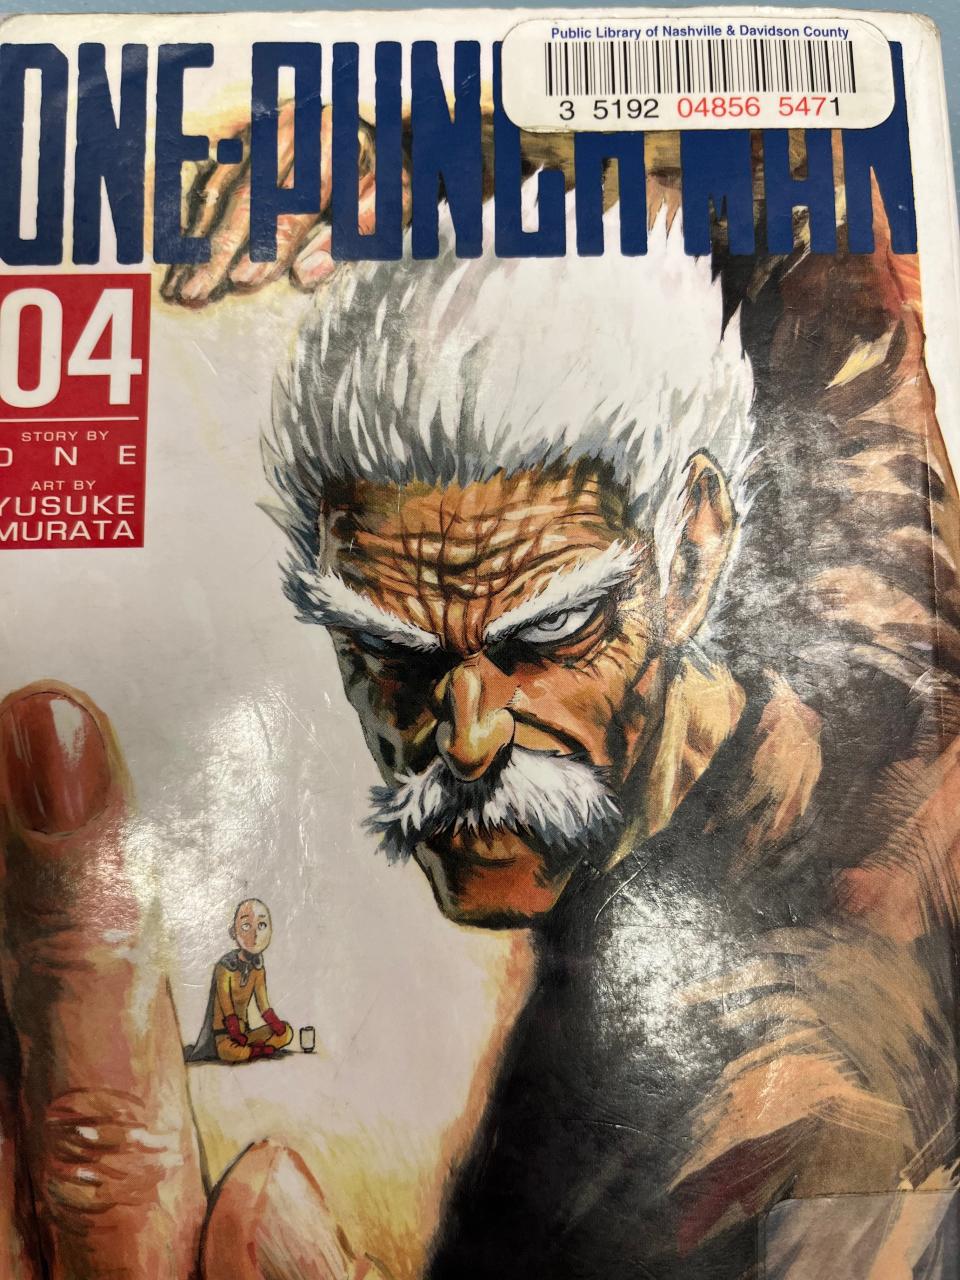 The cover of “One-Punch Man Volume 4” by ONE